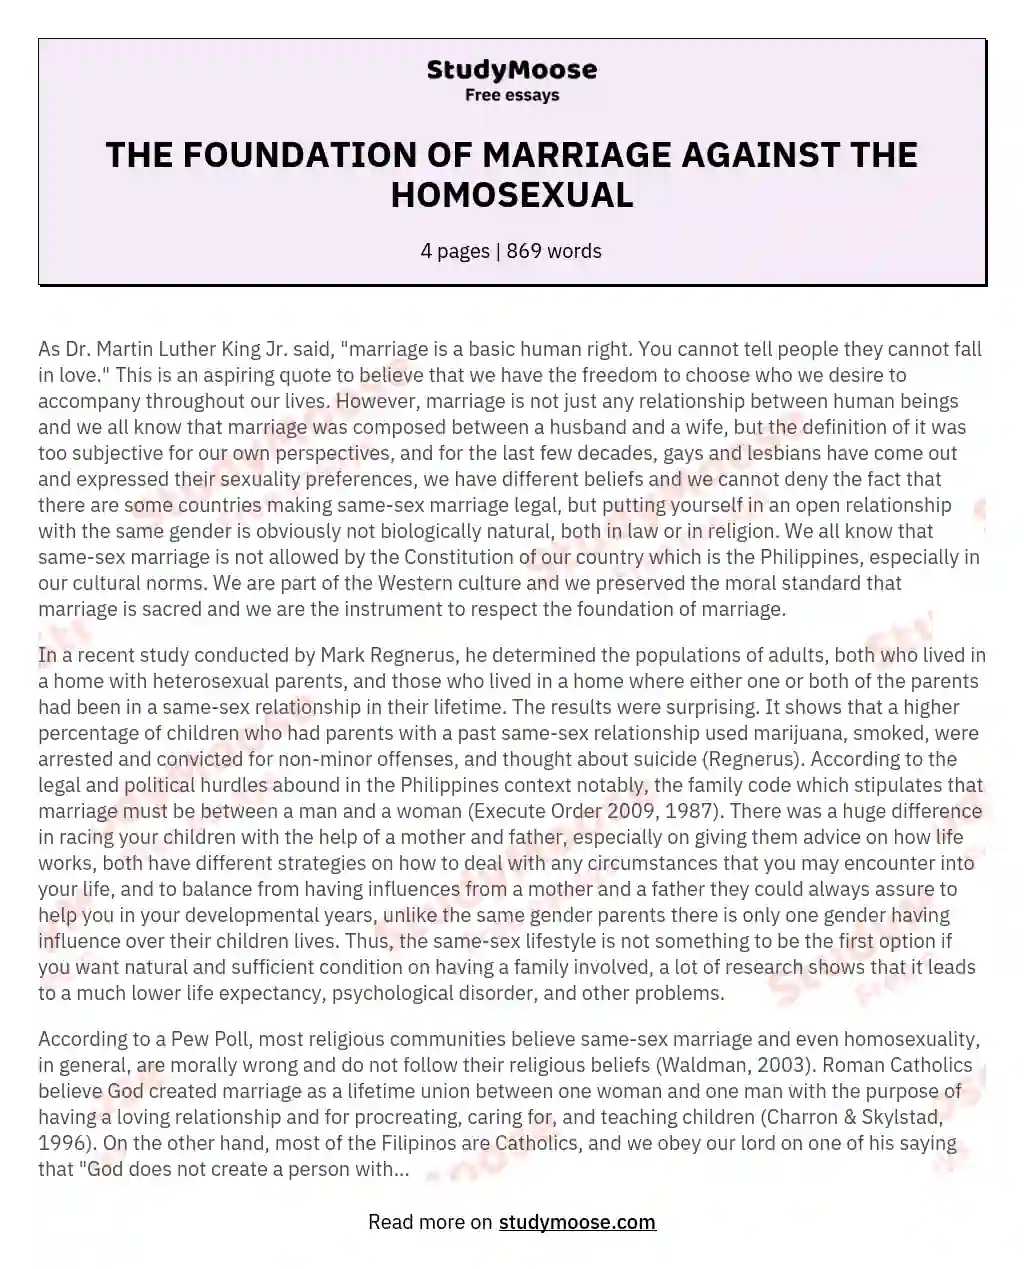 THE FOUNDATION OF MARRIAGE AGAINST THE HOMOSEXUAL